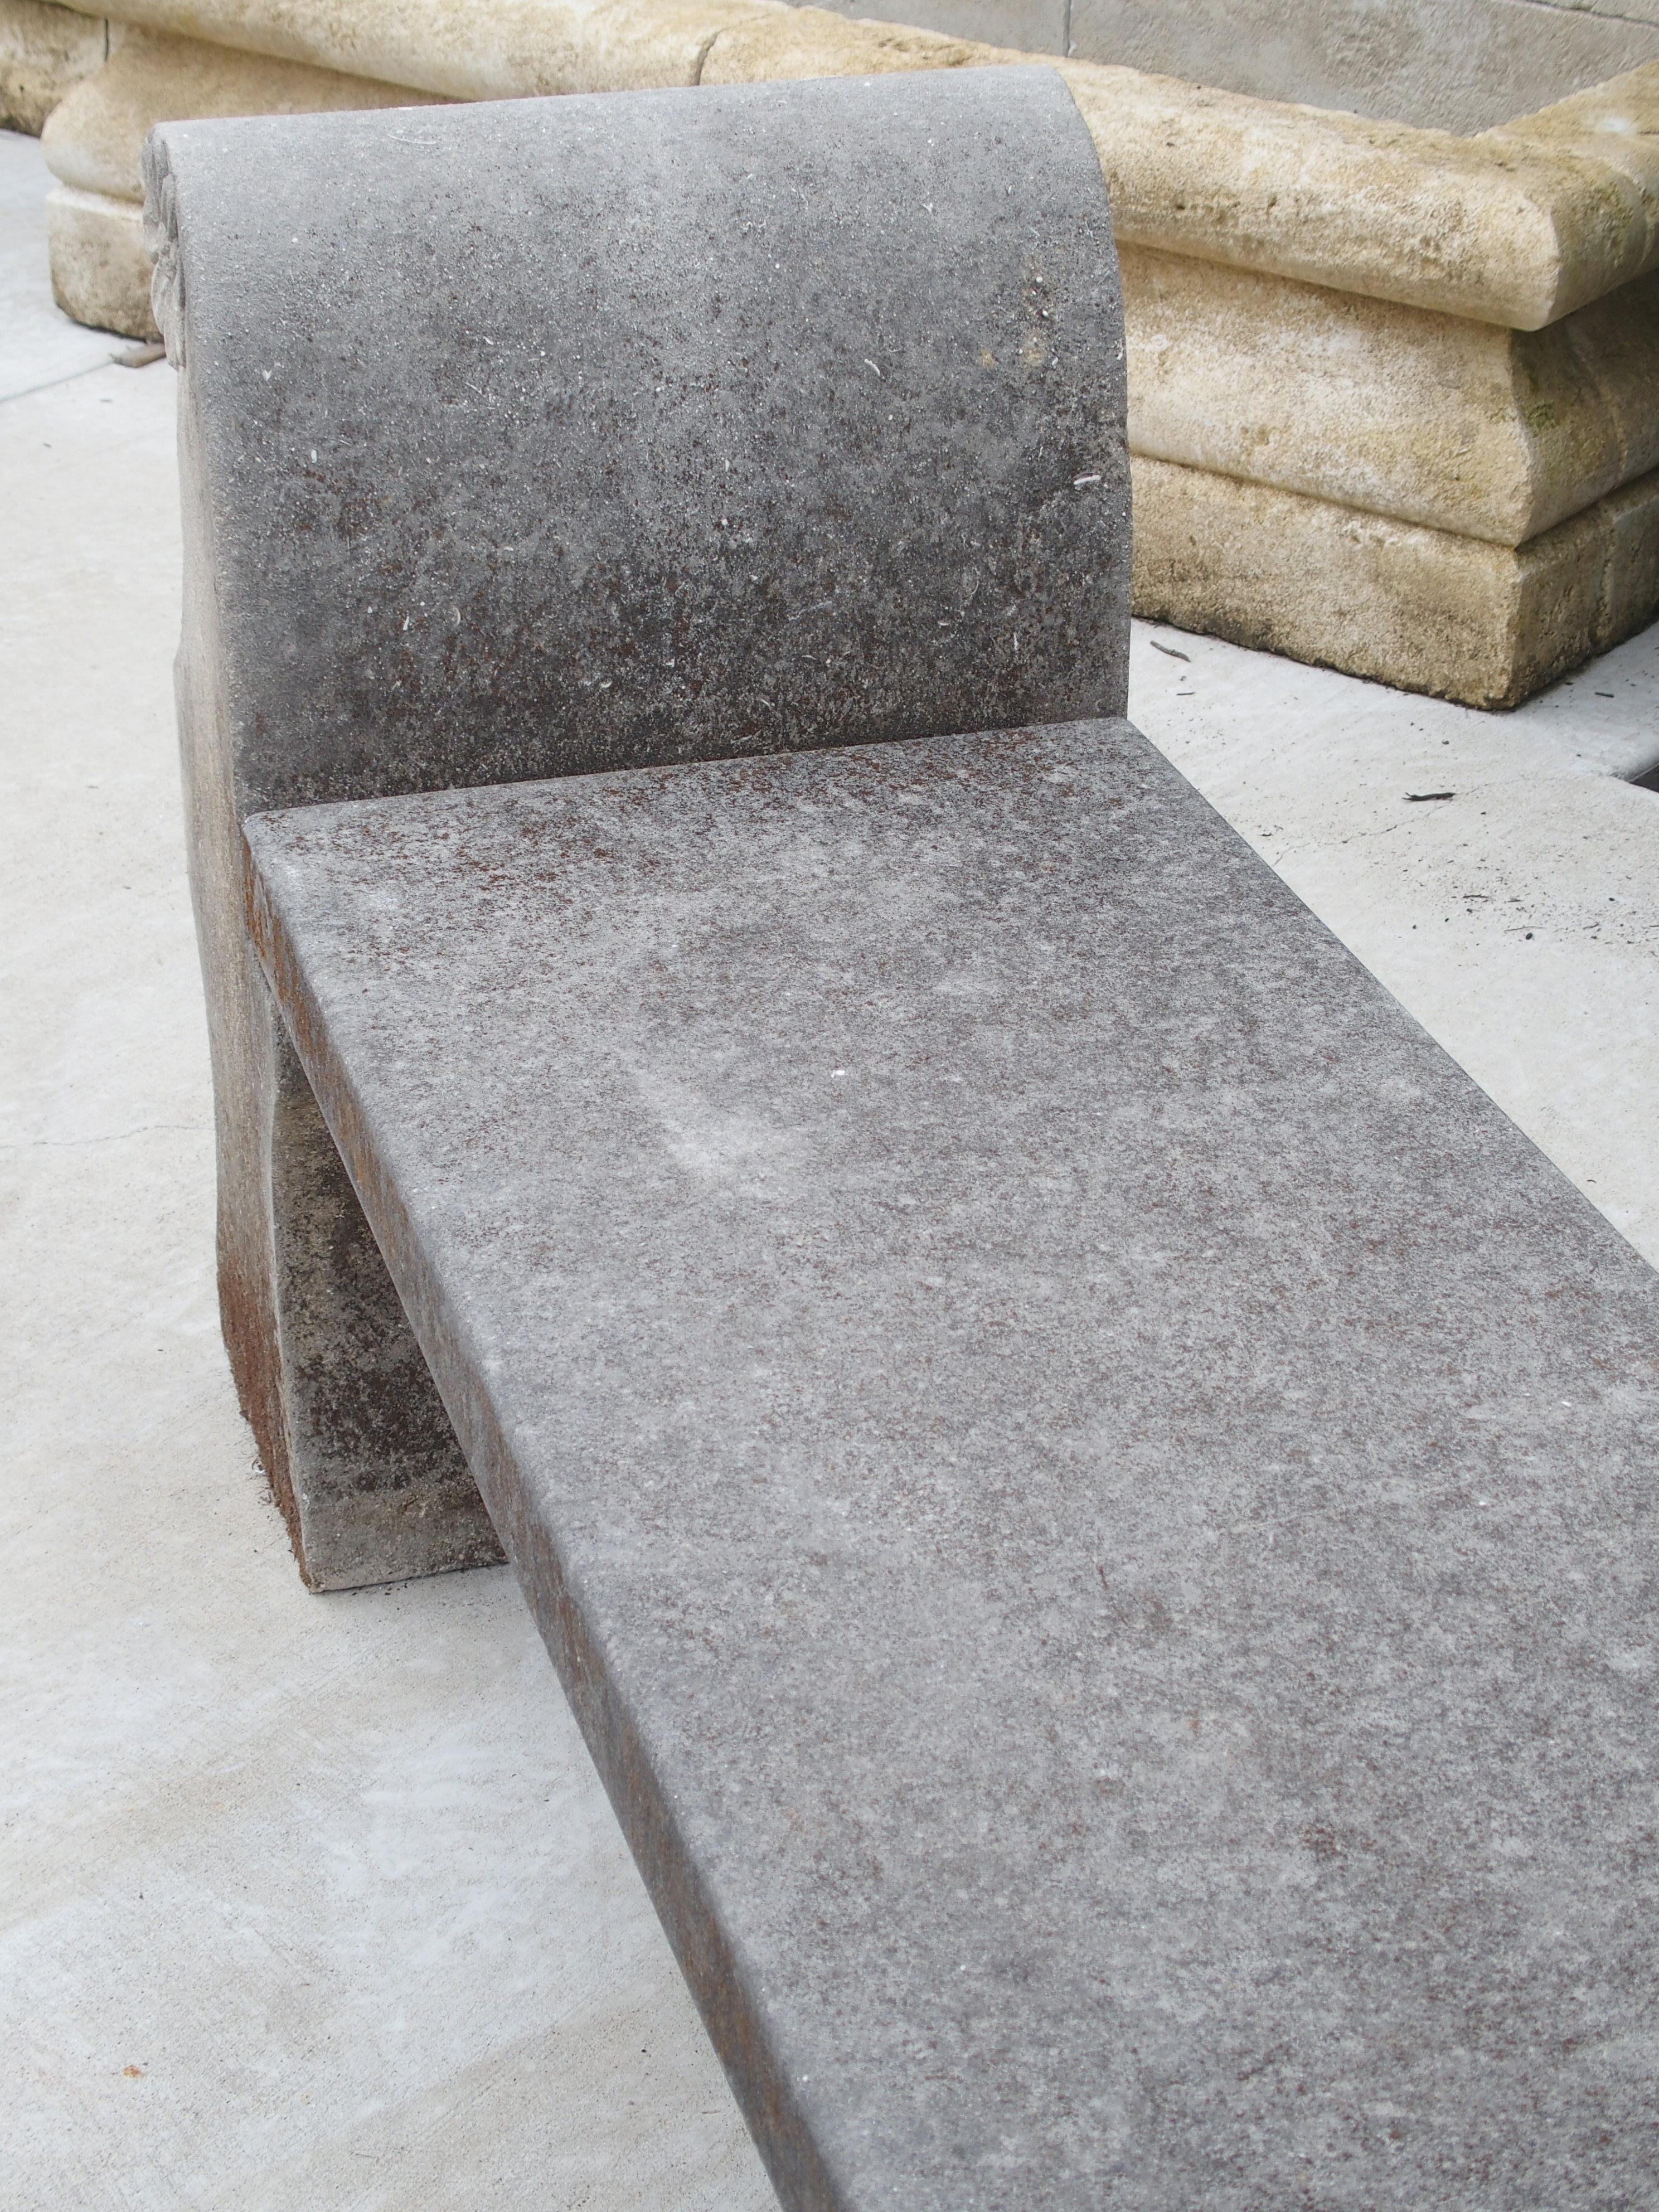 This garden bench has been hand carved from three pieces of Italian limestone. The thick rectangular seat is almost six feet long and rests on two identically shaped sides. The tops of the sides terminate in scrolled armrests embellished with carved